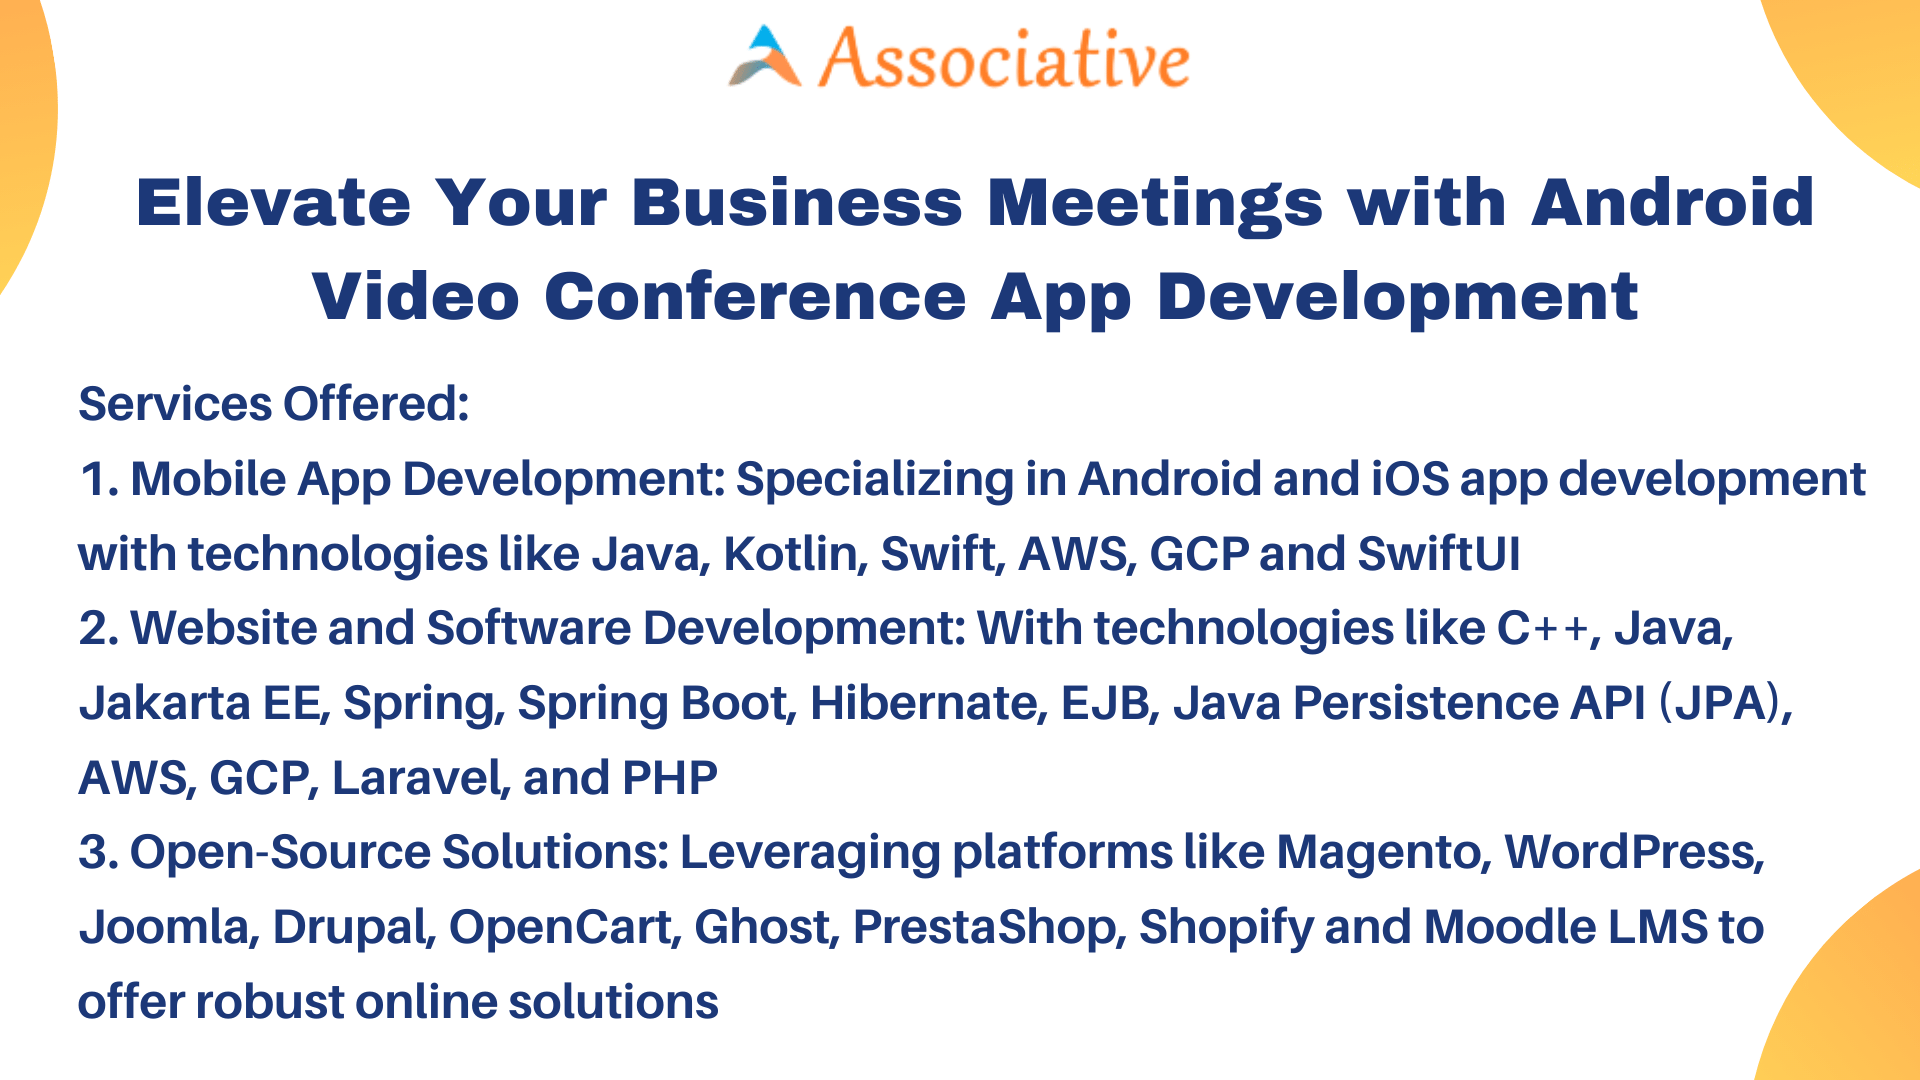 Elevate Your Business Meetings with Android Video Conference App Development